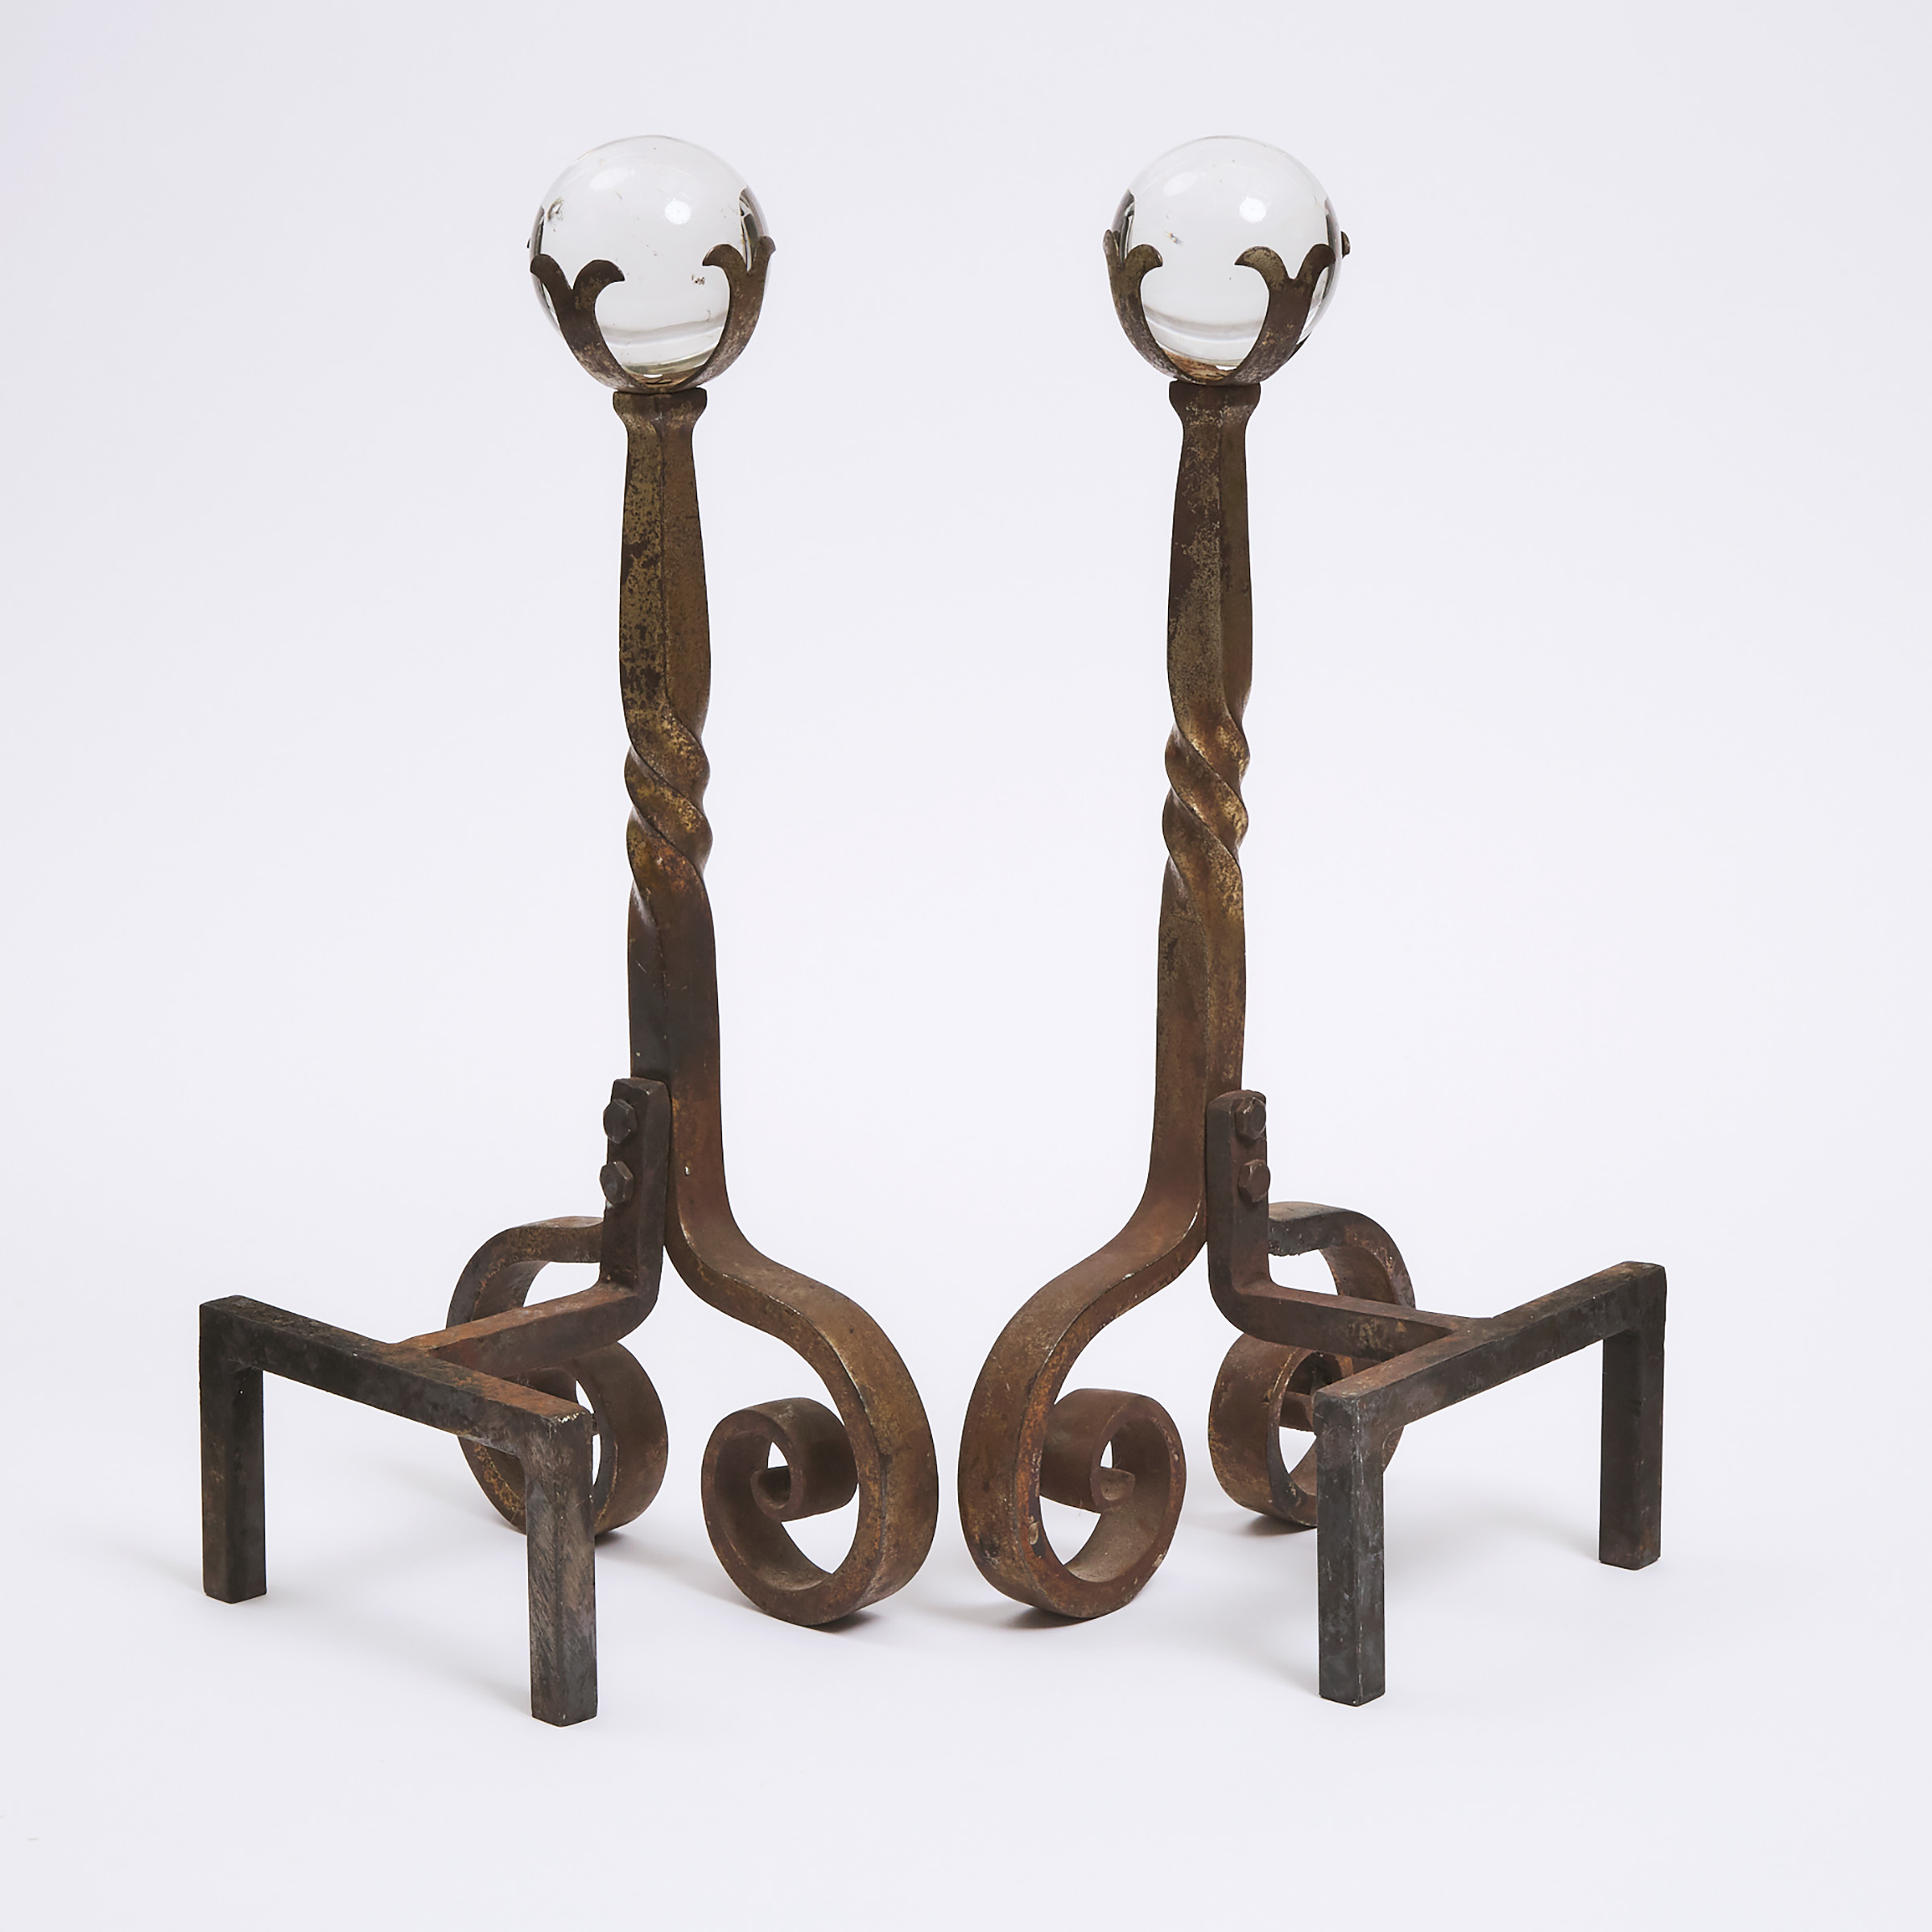 Pair of Glass Orb Mounted Wrought Iron Andirons, 19th century